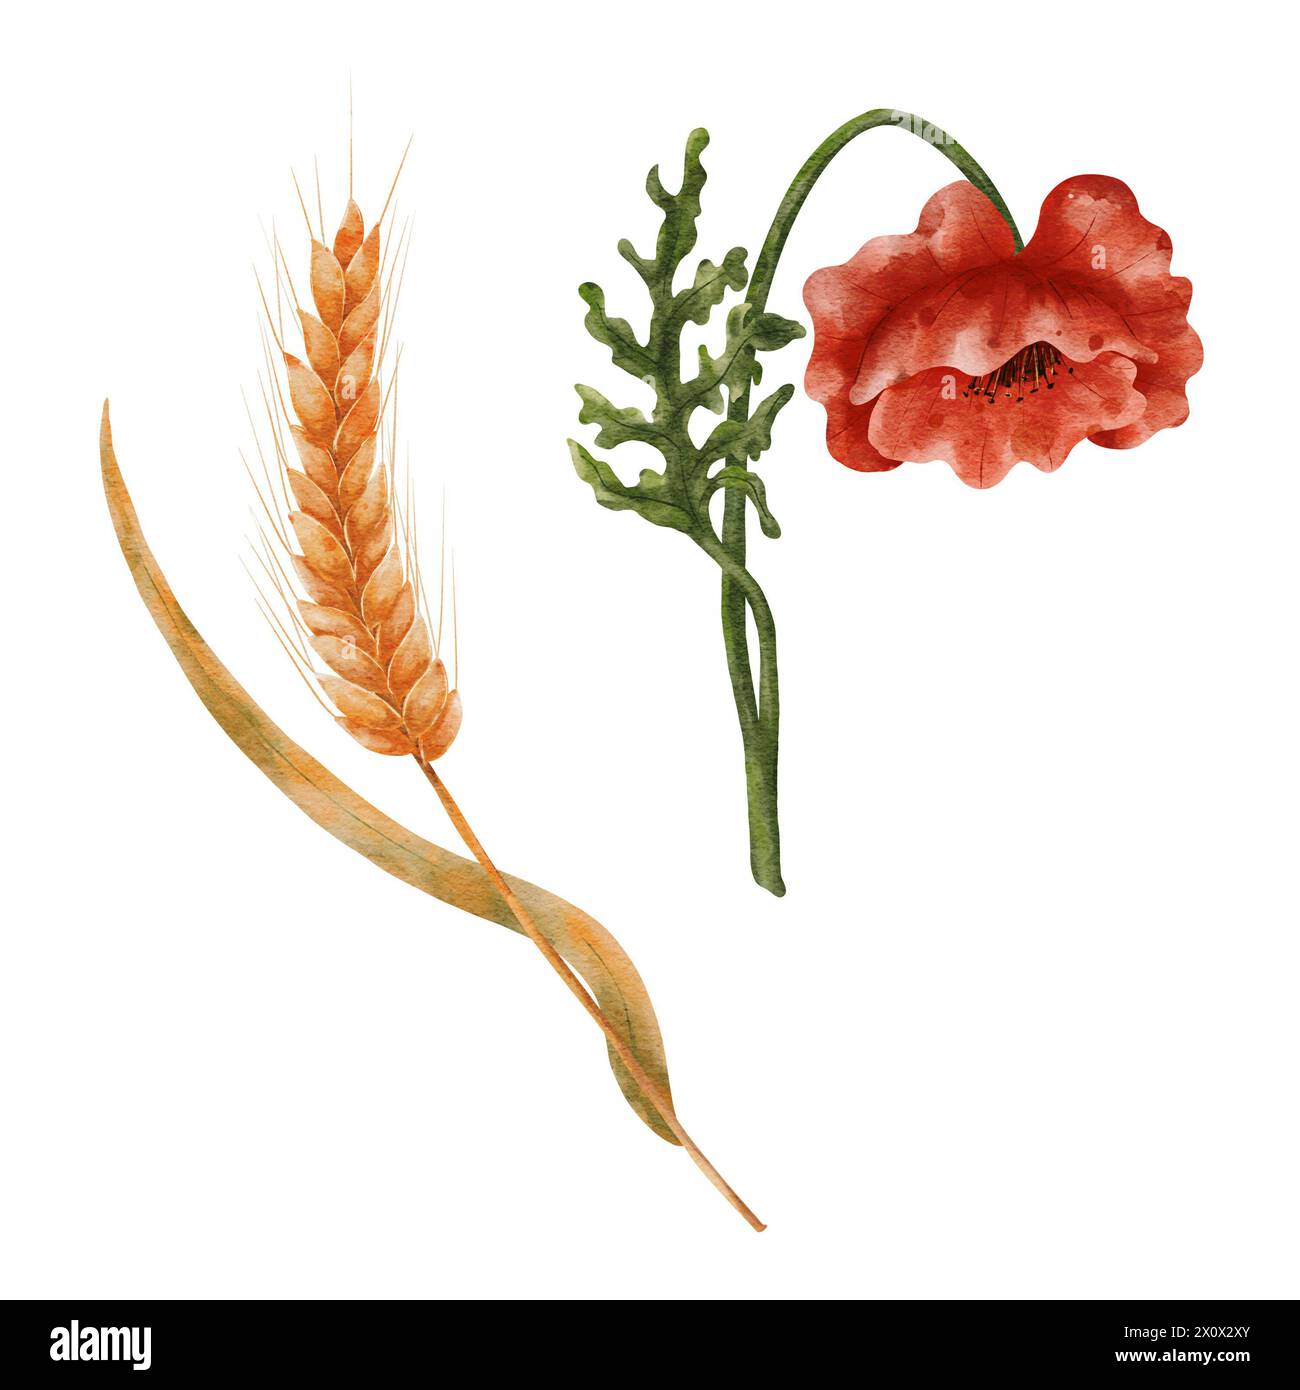 Watercolor wheat and field poppies. Elements isolated on a white background. A ripe ear of wheat. Stock Photo